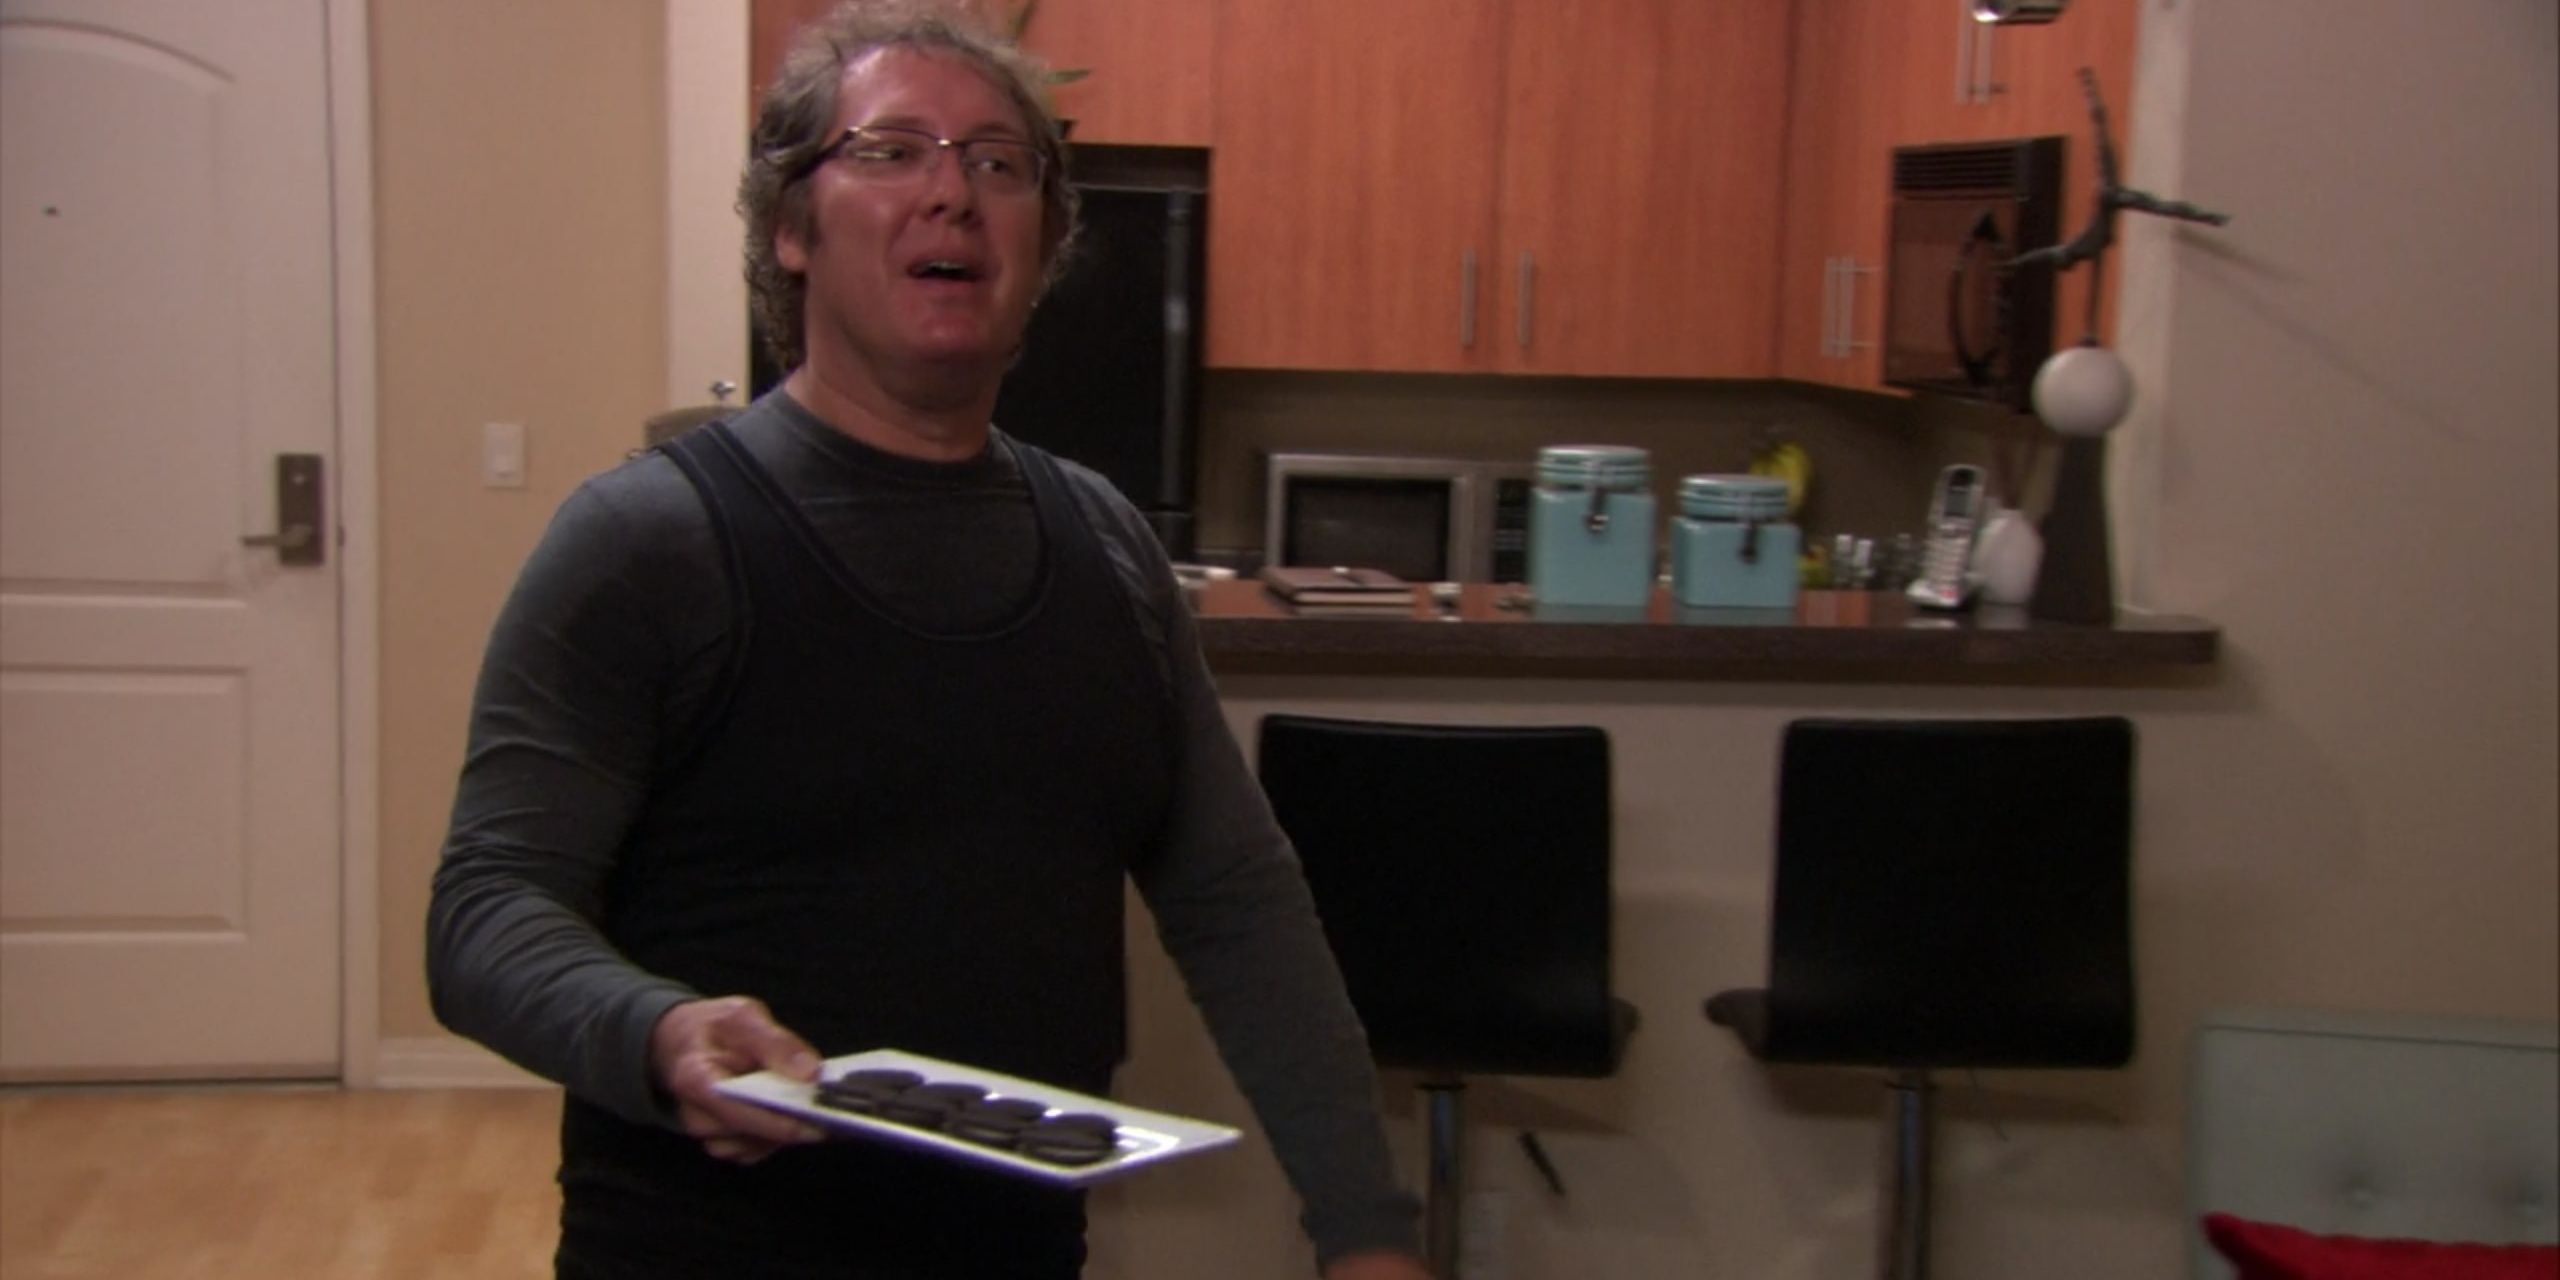 Robert offers Oreos to Dwight in his apartment in The Office